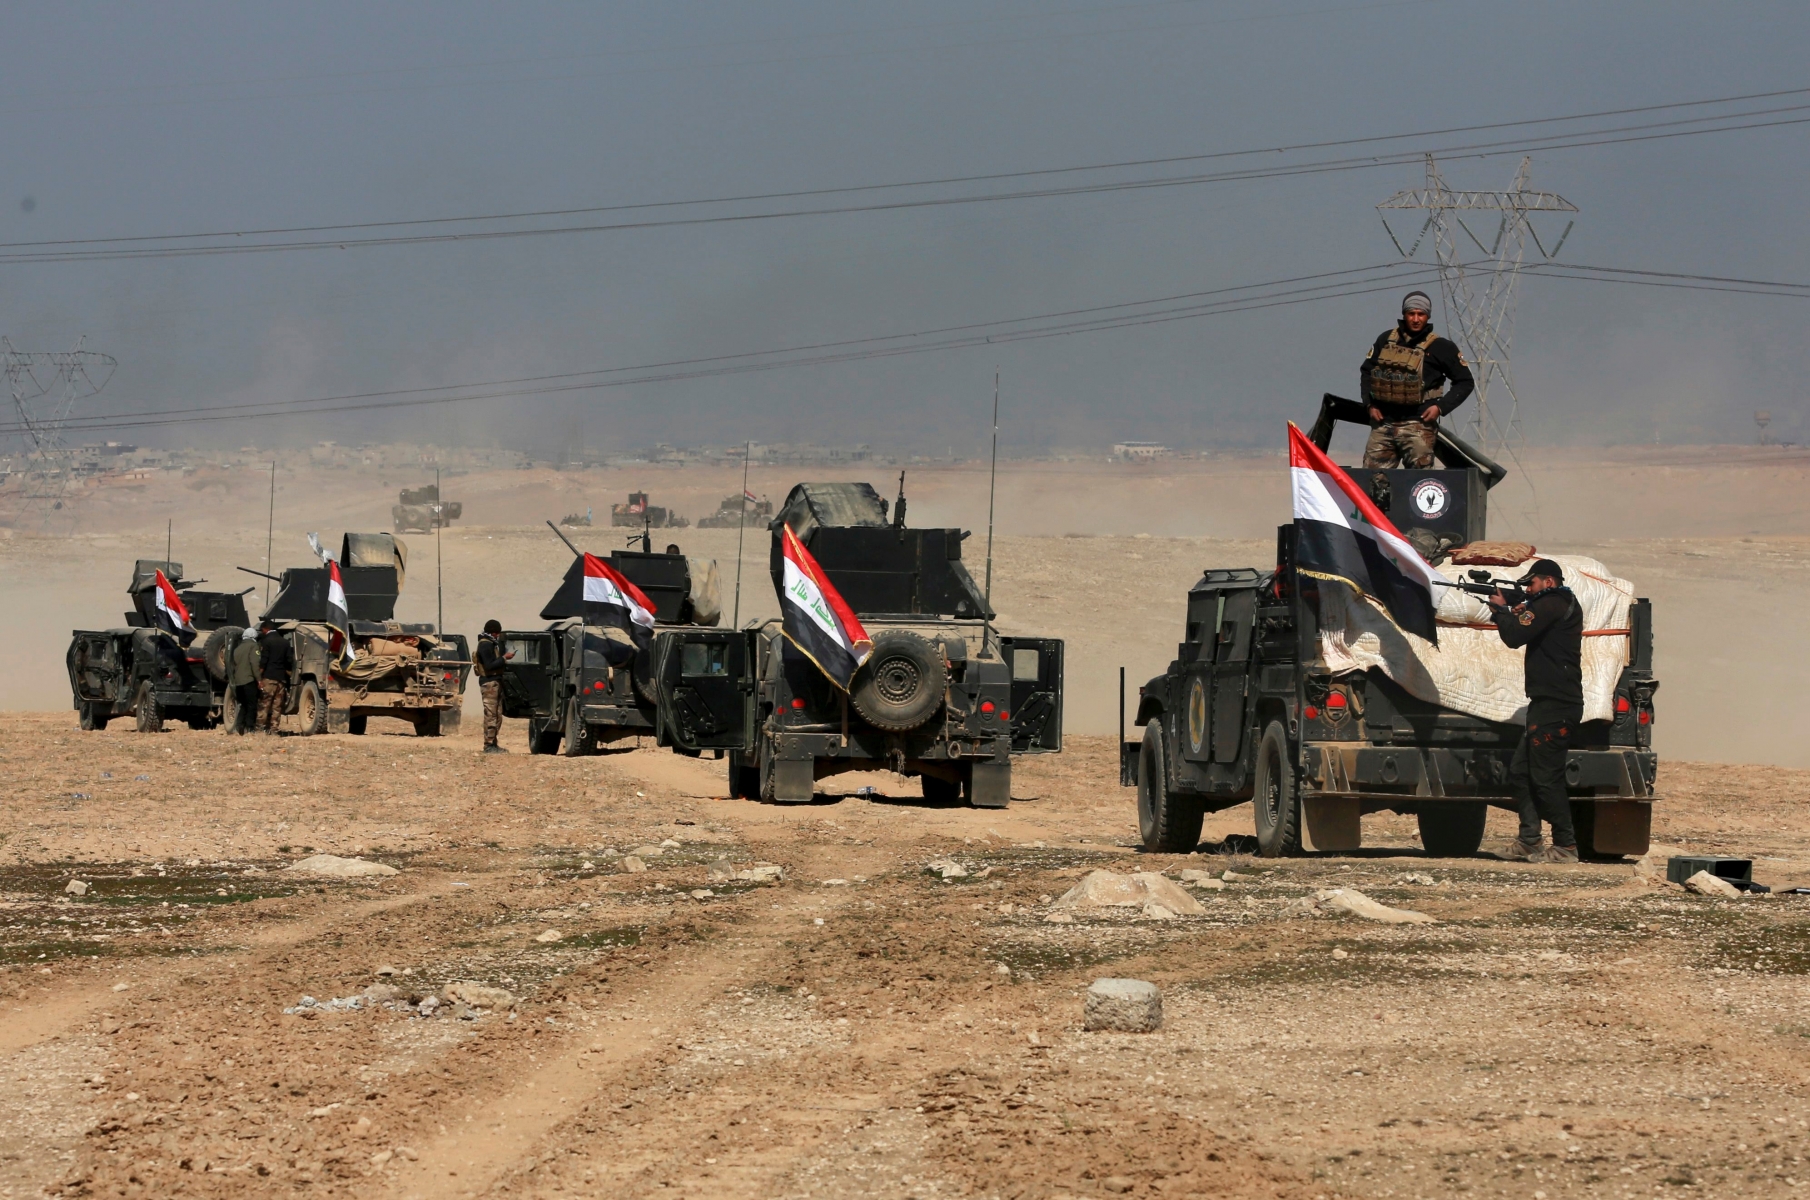 Iraqi special forces advance towards the western side of Mosul, Iraq, Thursday, Feb. 23, 2017. The advance comes as part of a major assault that started five days earlier to drive Islamic State militants from the western half of Mosul, Iraq's second-largest city. (AP Photo/ Khalid Mohammed) Iraq Mosul